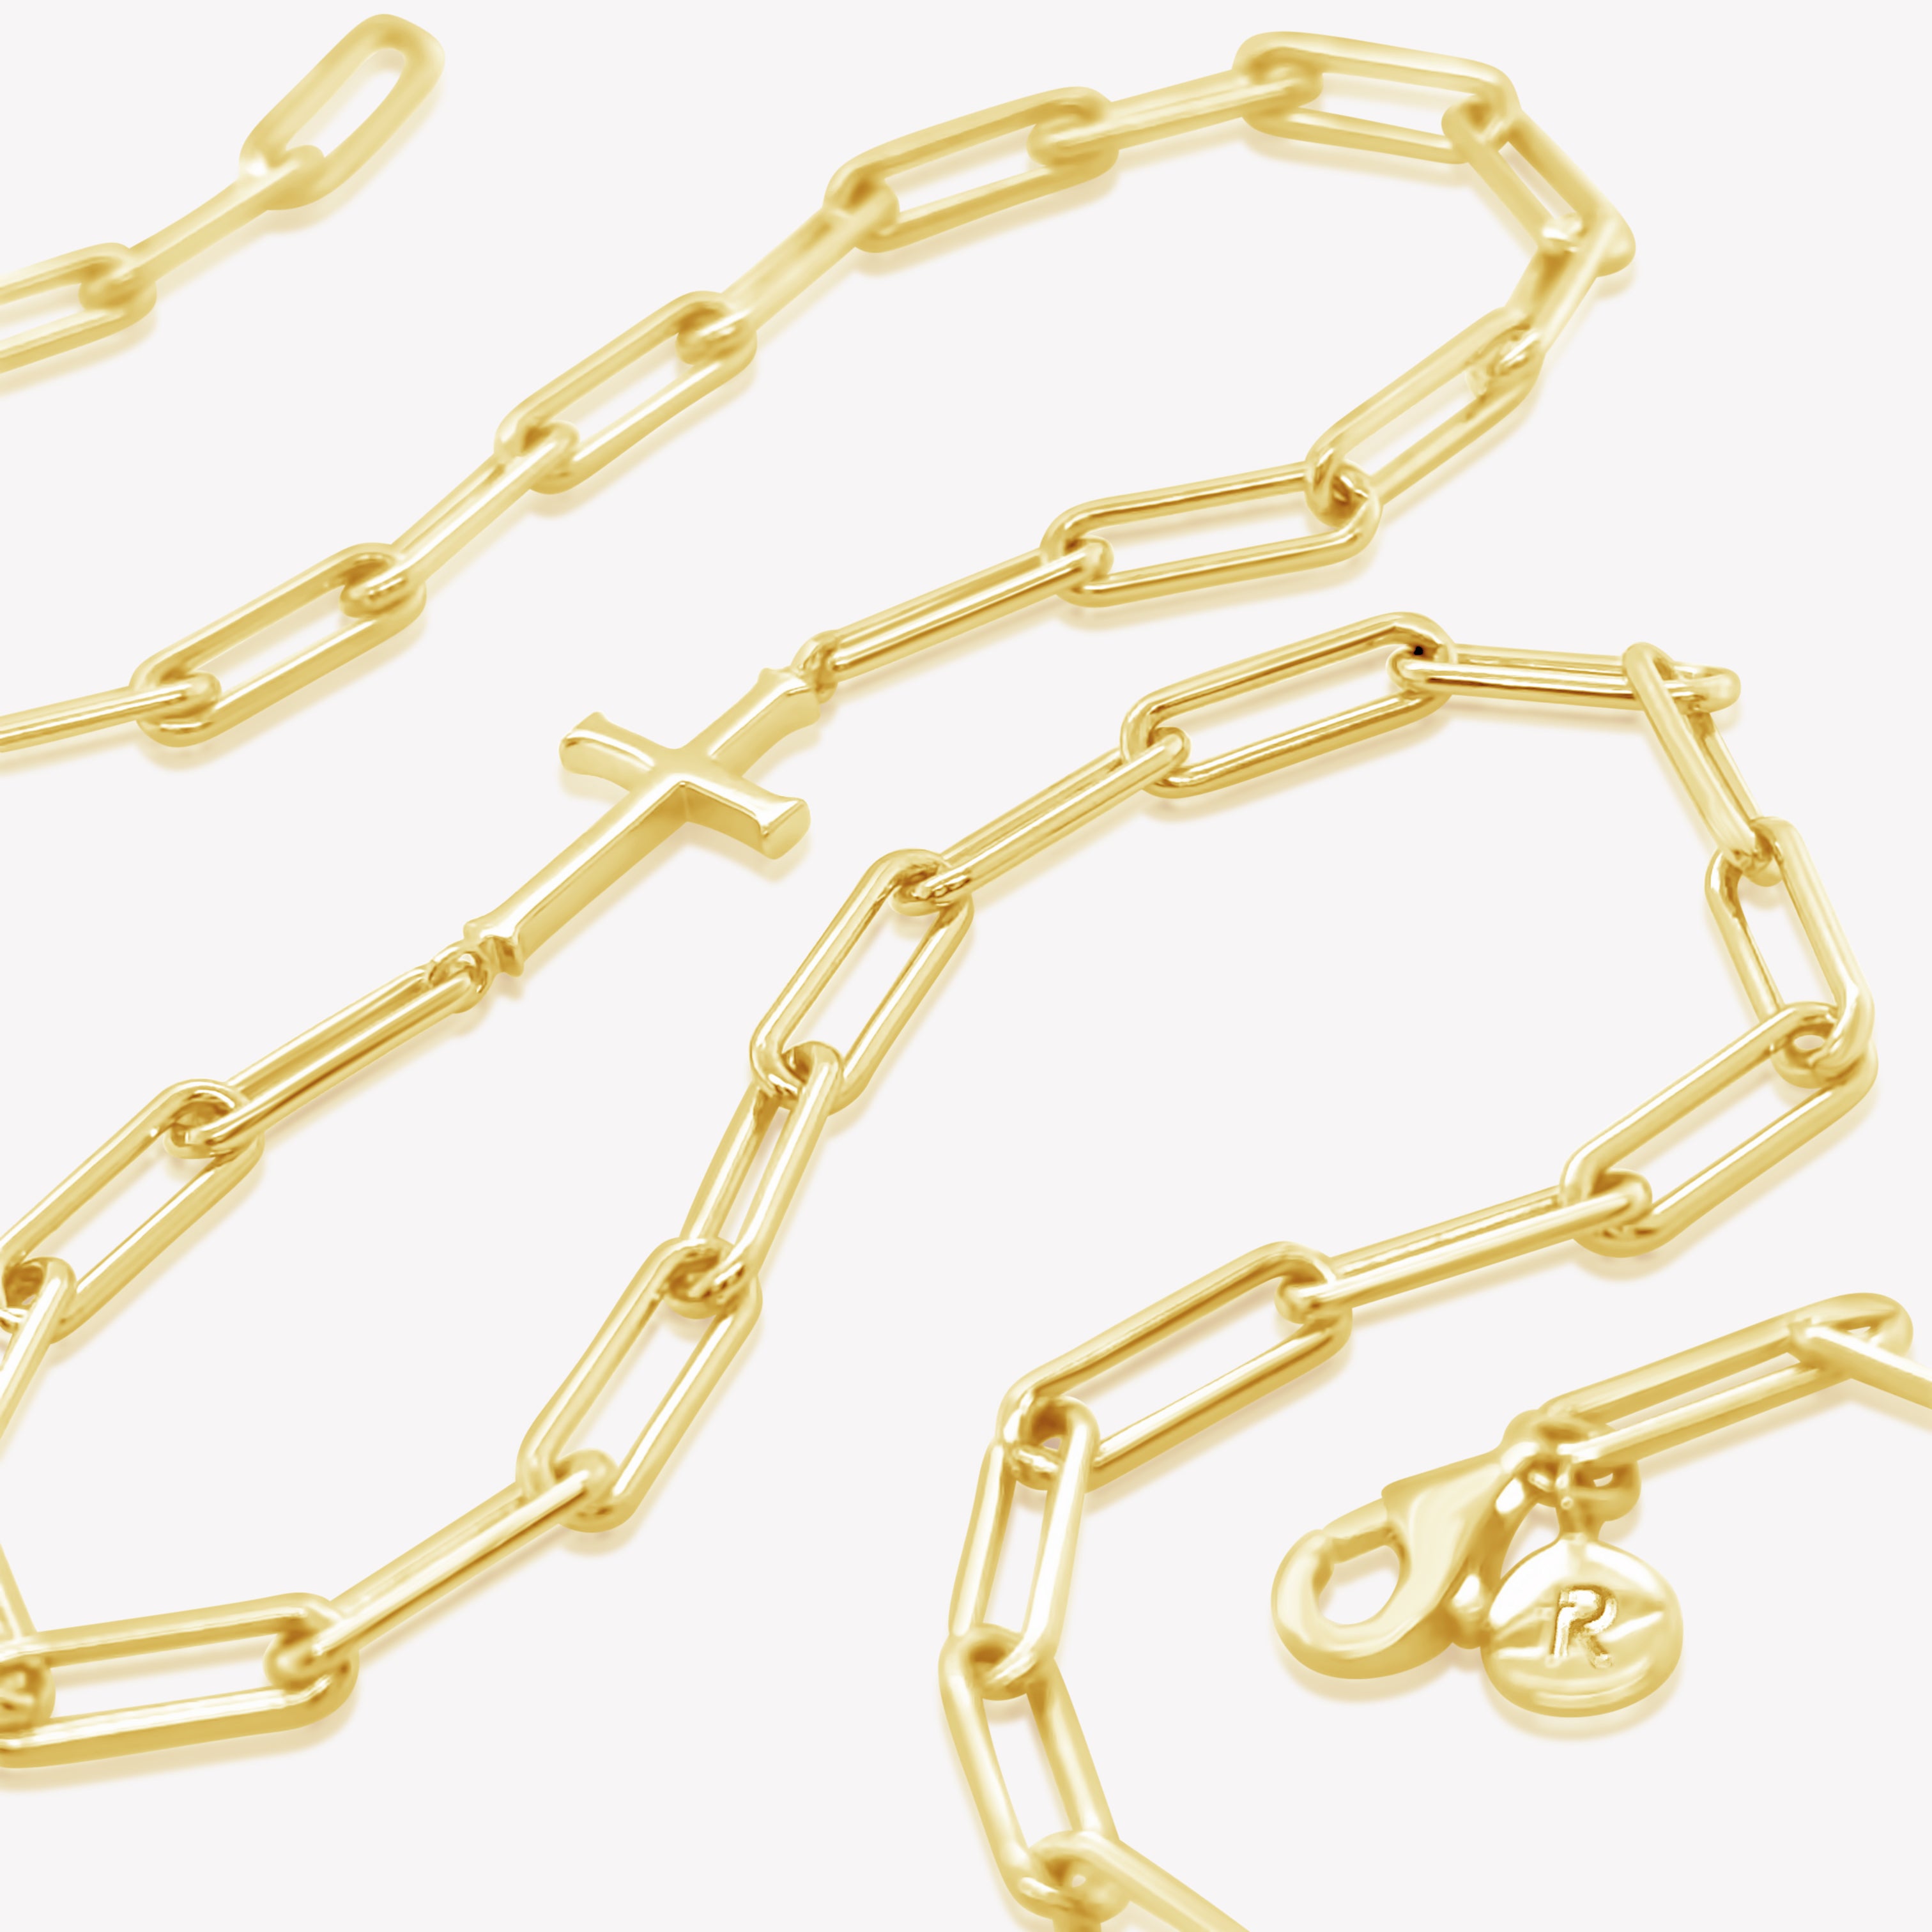 Rizen Jewelry Chain Breaker necklace in 18kt yellow gold.  Elegant Cross Pendant breaks up the paper clip link chain with classic lobster clasp  closure.